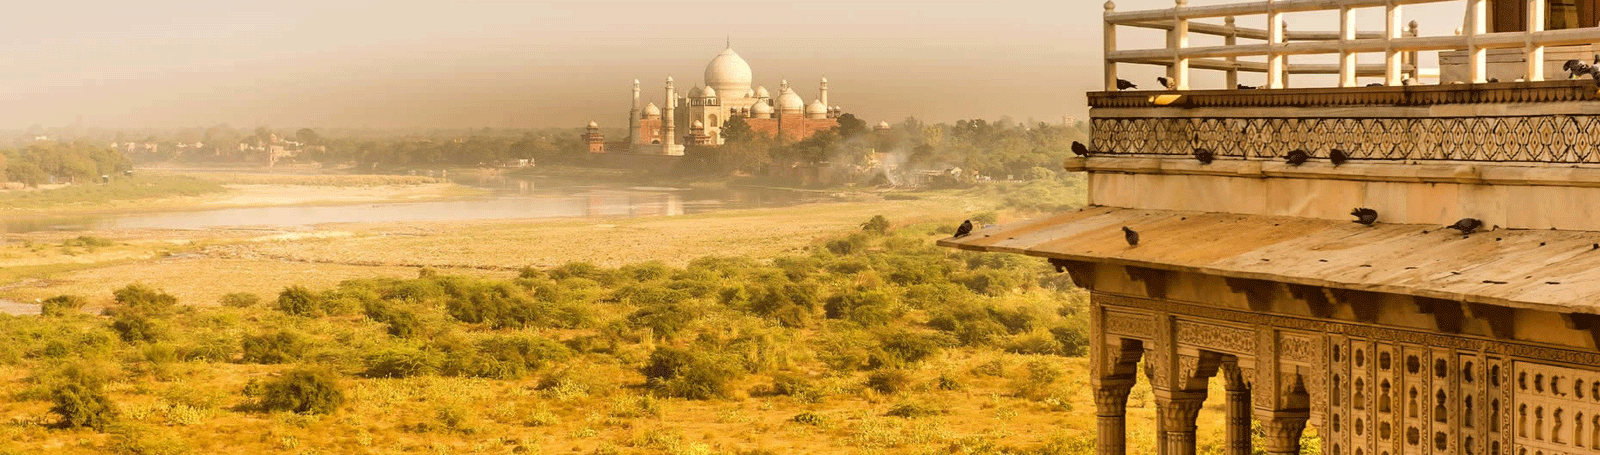 Golden Triangle Tour with Pushkar 6 Night & 7 Day